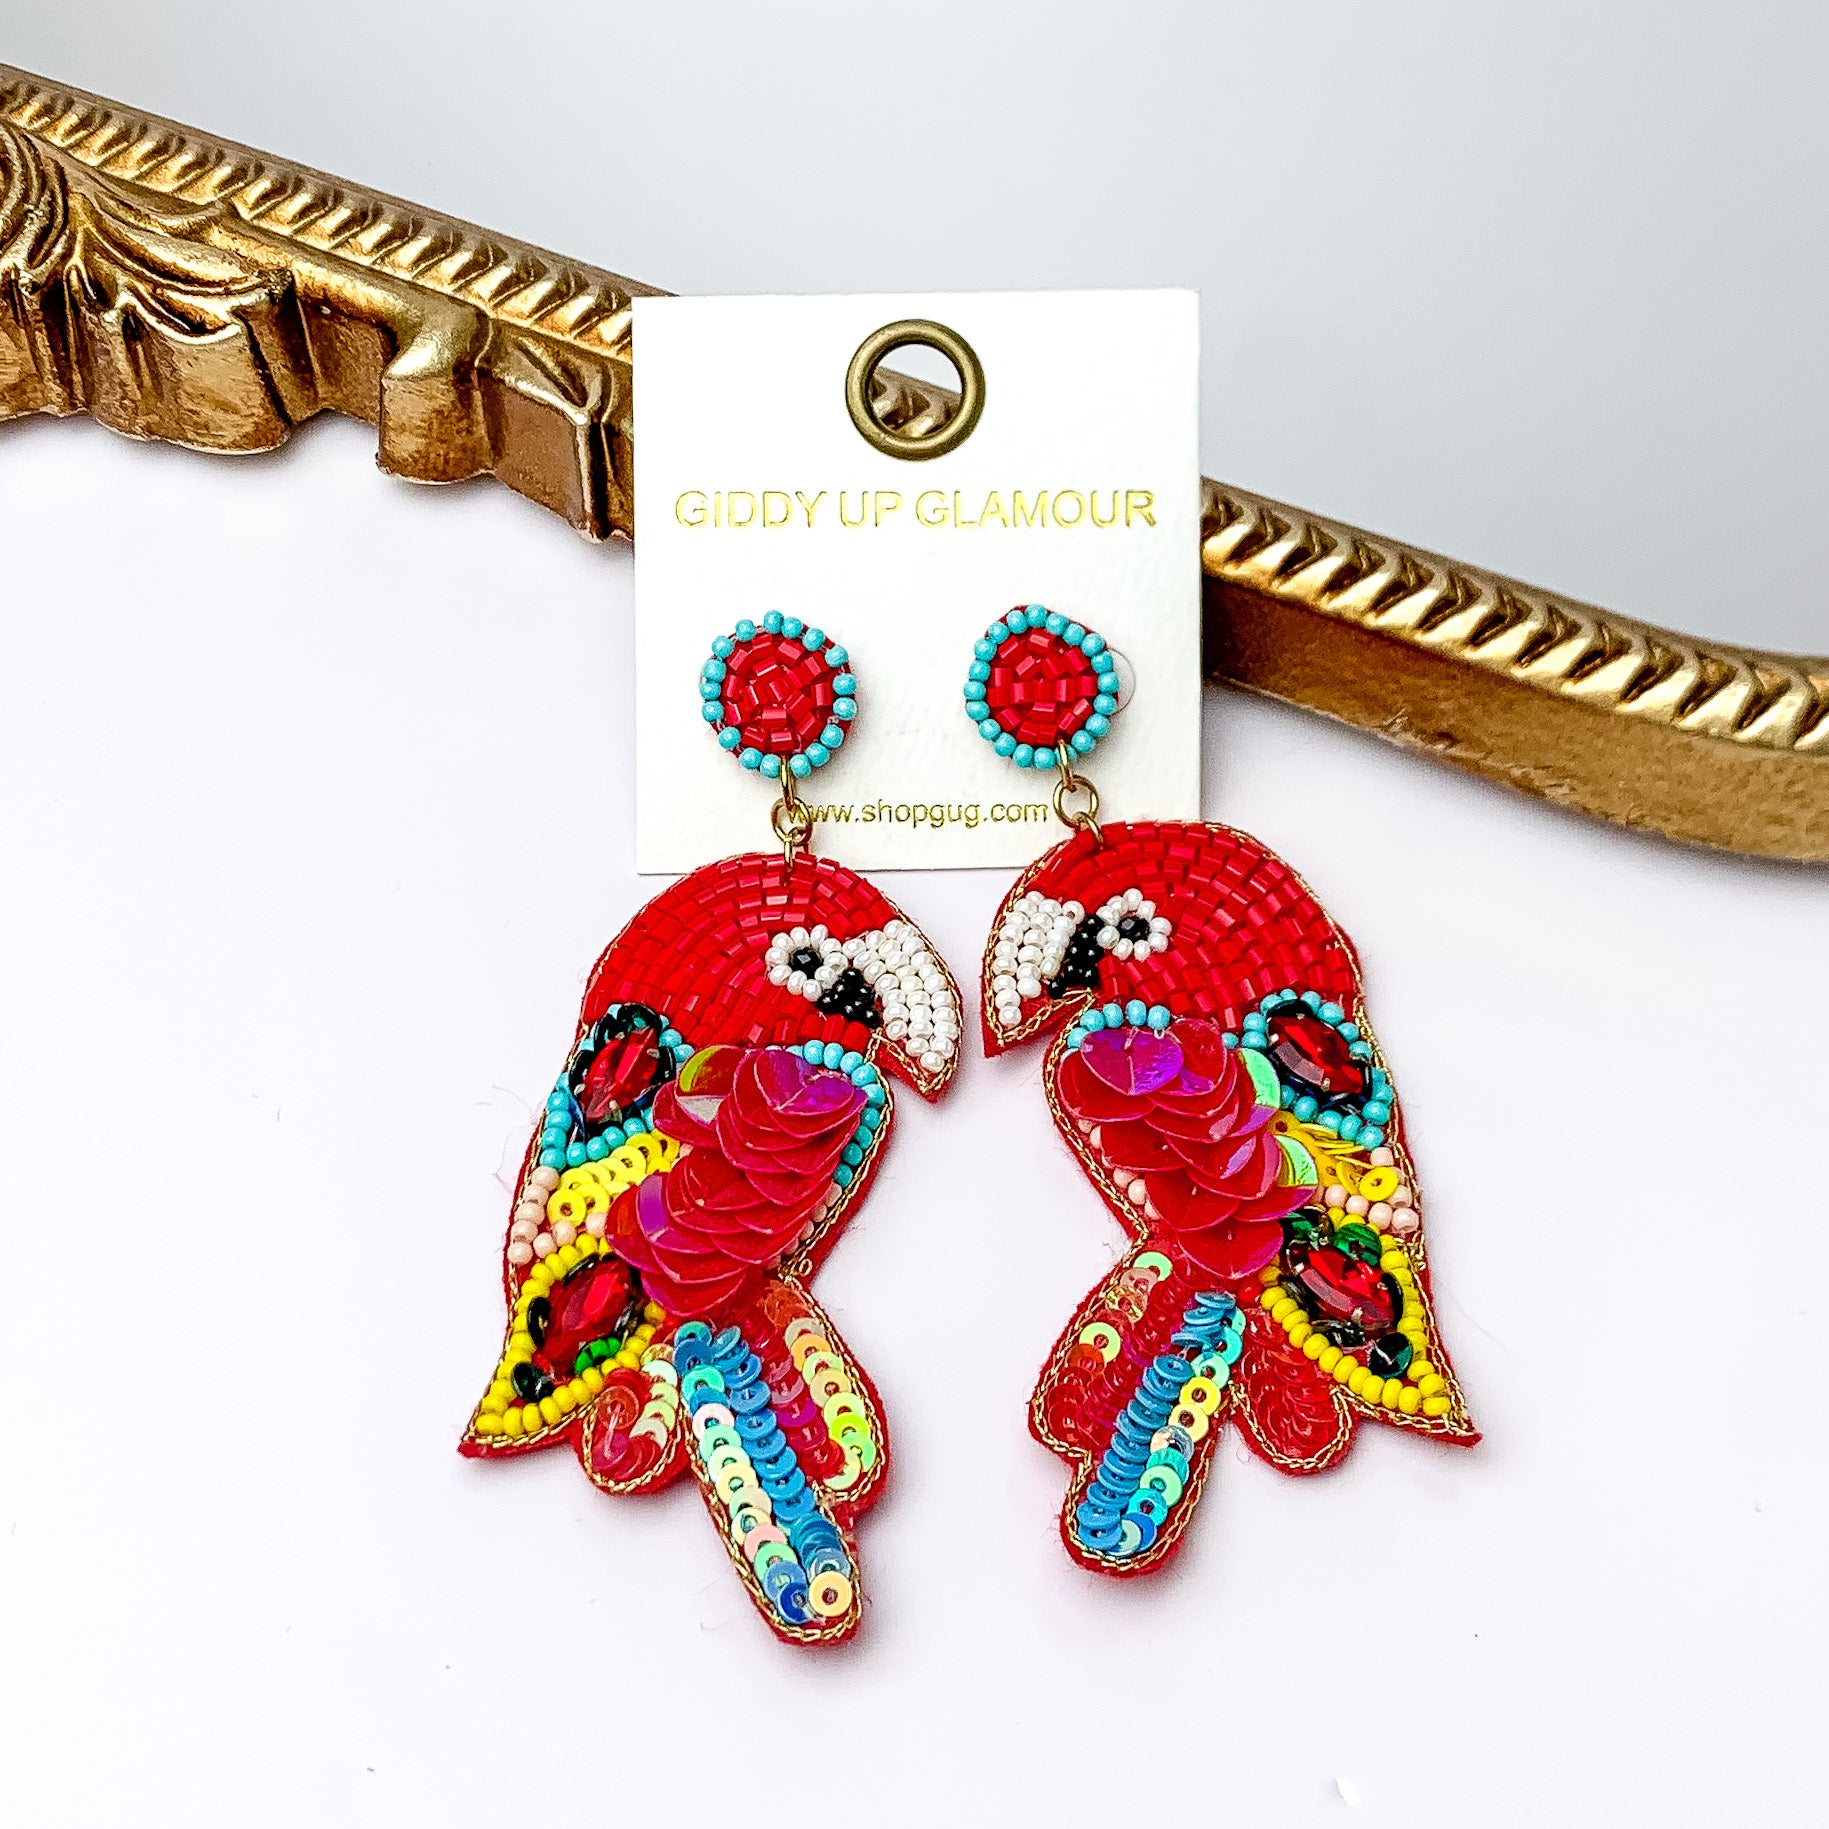  These parrot earrings are red with a little bit of blue, yellow, and black beads. There is also some red  and green seqence across the earrings. These earrings are pictured in front of a gold mirror on a white background.